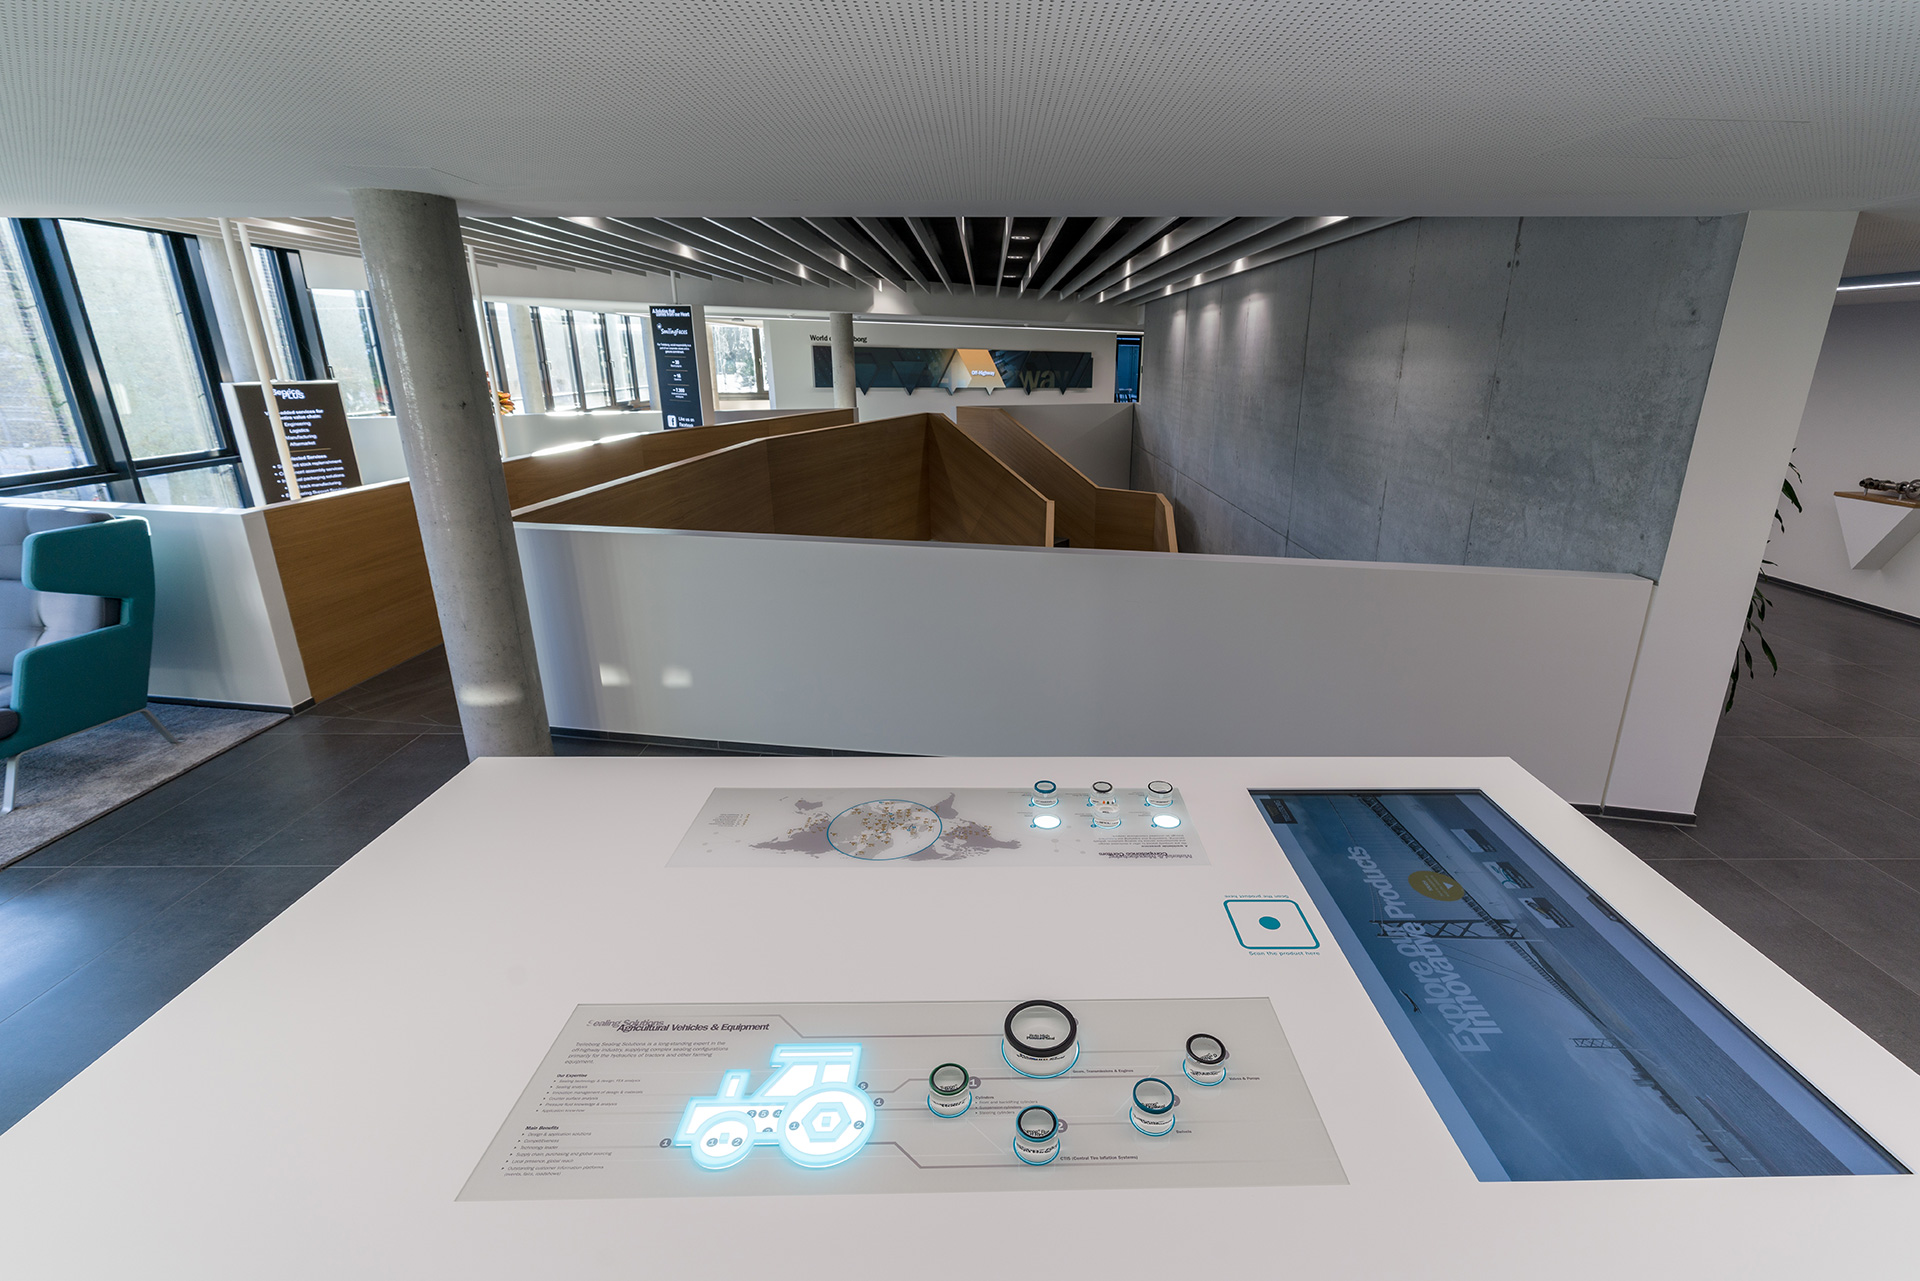 All exhibits, such as this multi-touch table, for the virtual presentation of the portfolio are networked and thus enable the rapid updating of all content in day-to-day operation. Depending on the frequency of updates and the graphical requirements, all content is either changed in content management mode or automatically synchronized via network drives. Trelleborg employees manage all content.